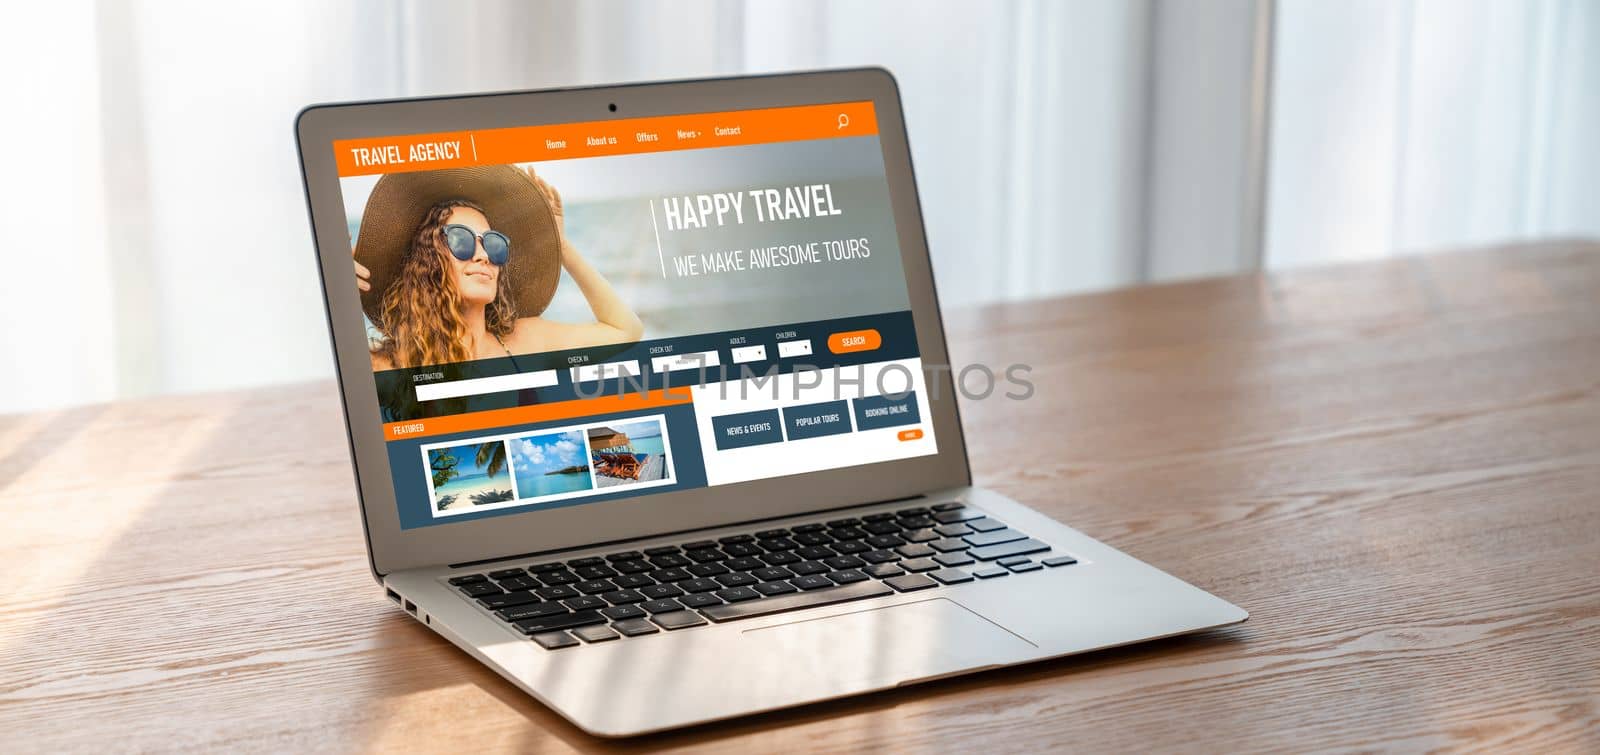 Online travel agency website for modish search and travel planning by biancoblue